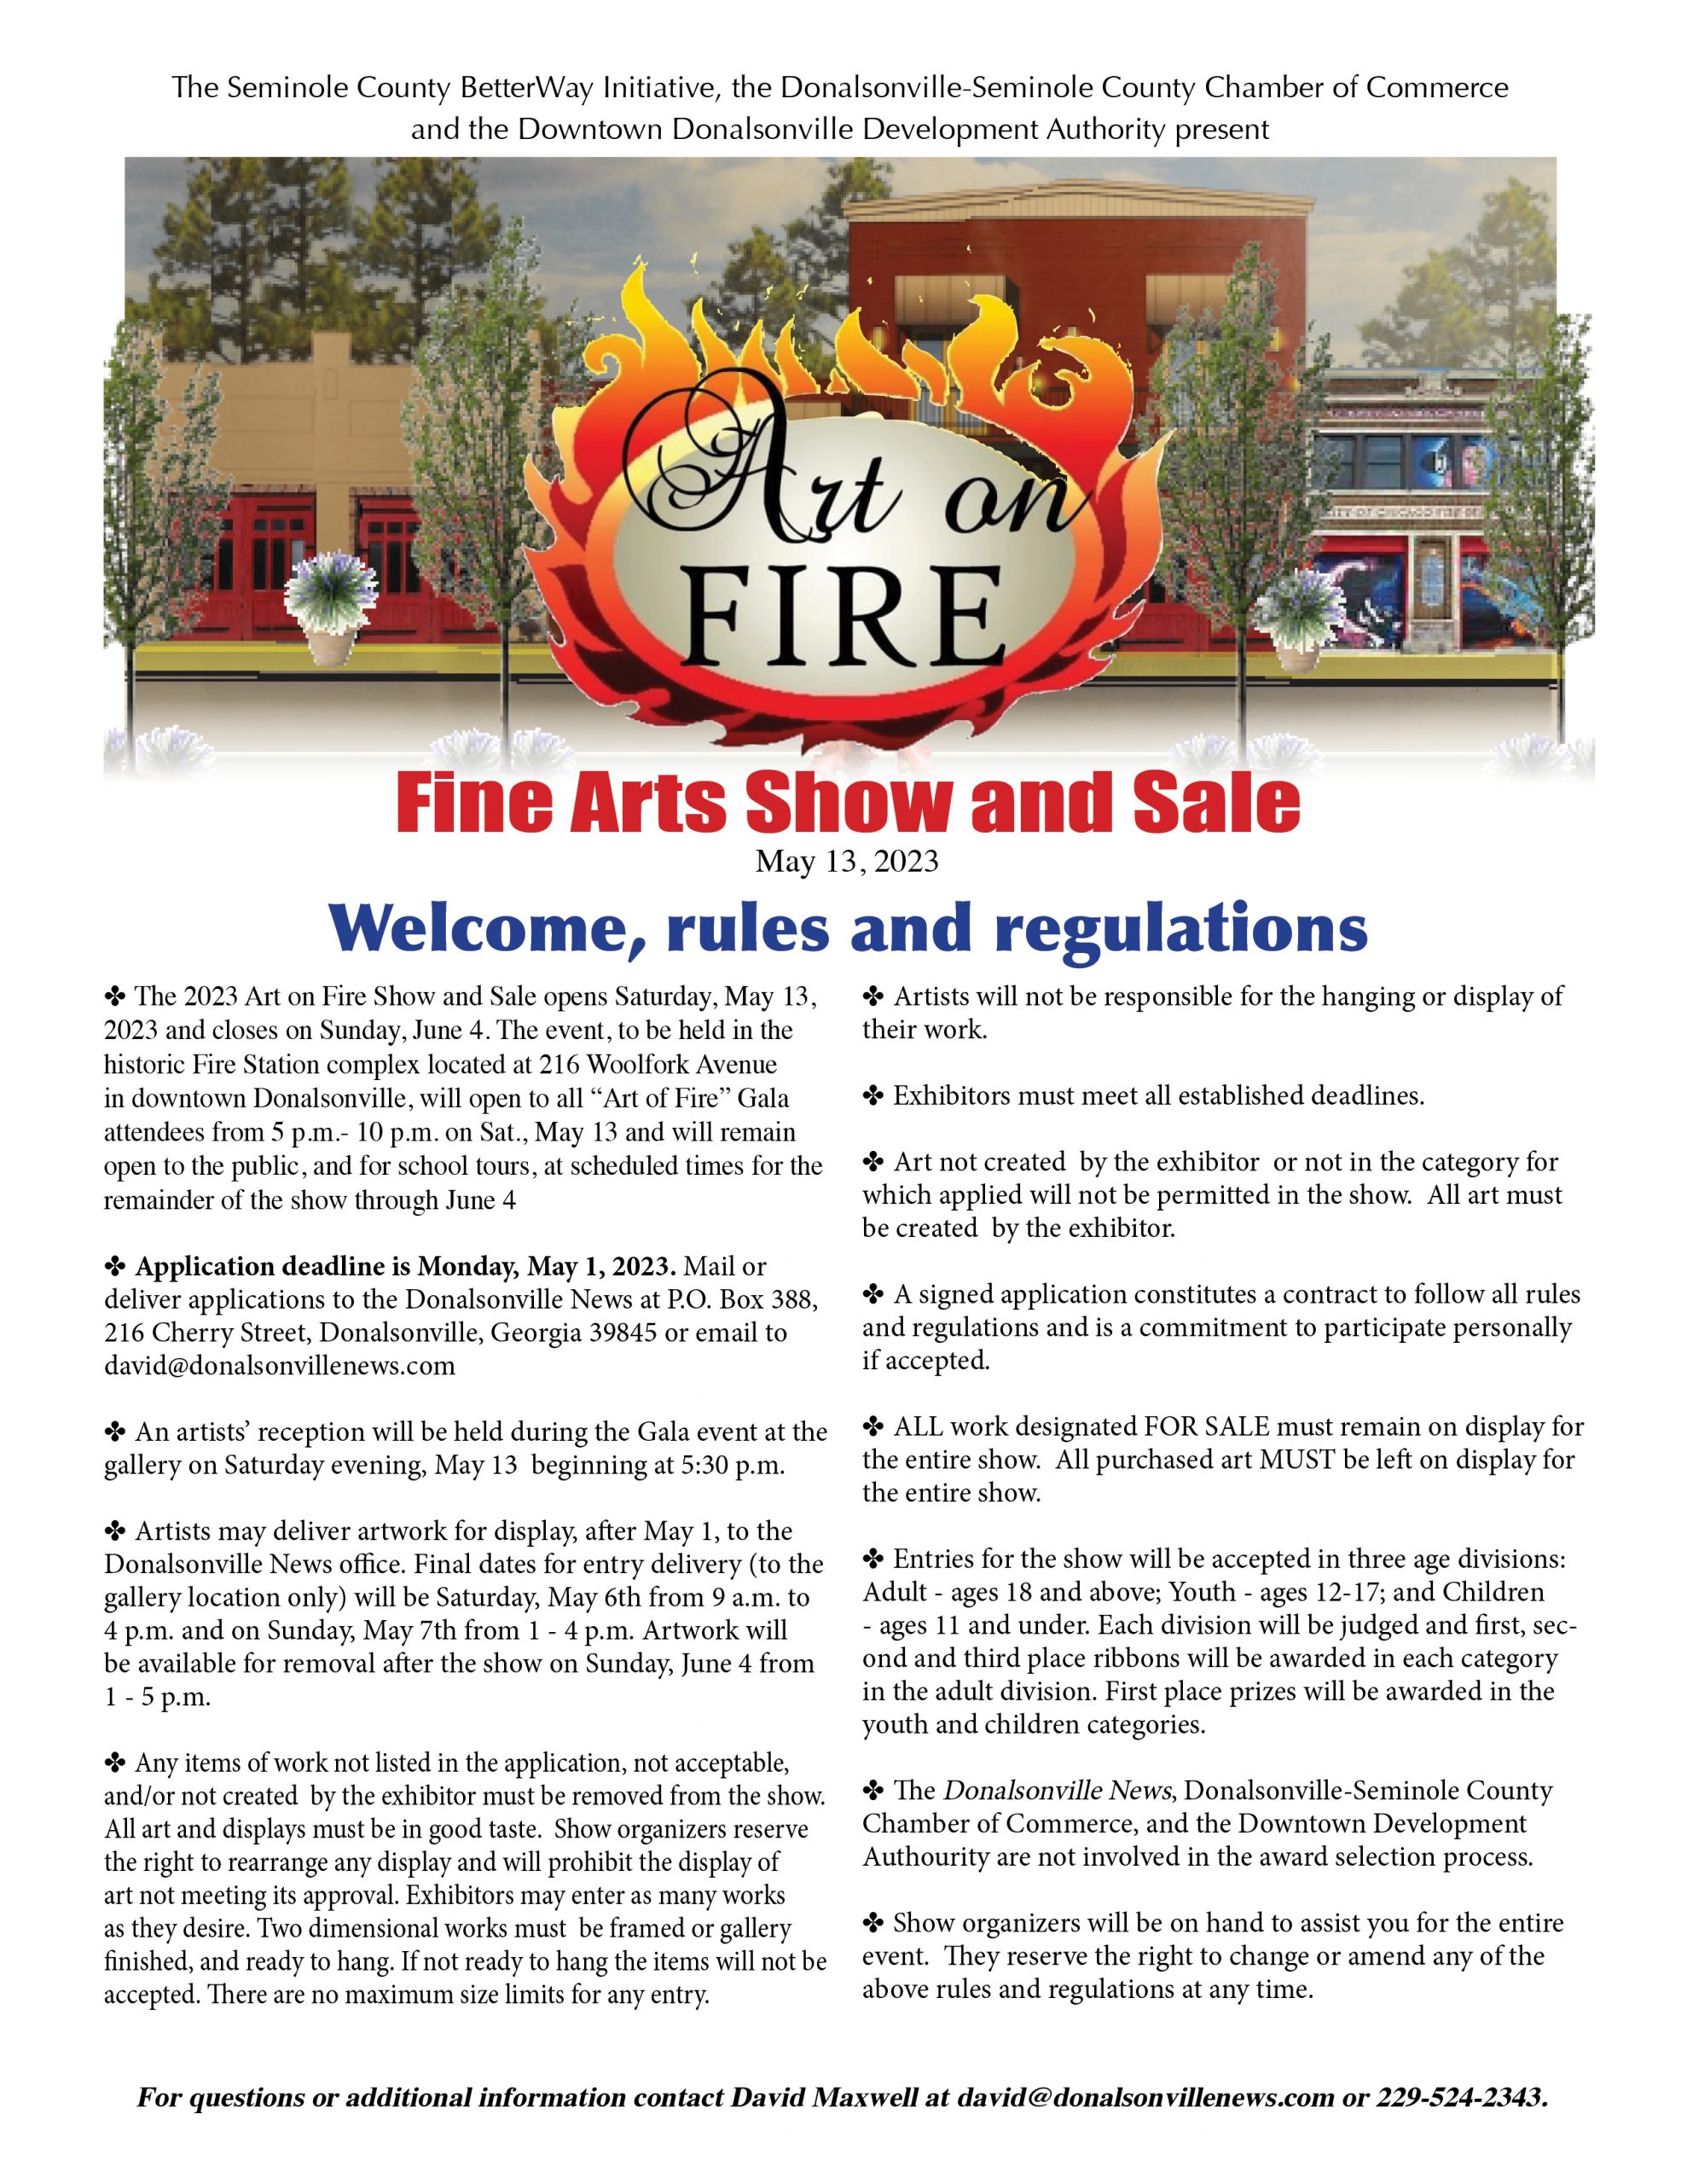 May 13: Art on Fire Kickoff & Art Show